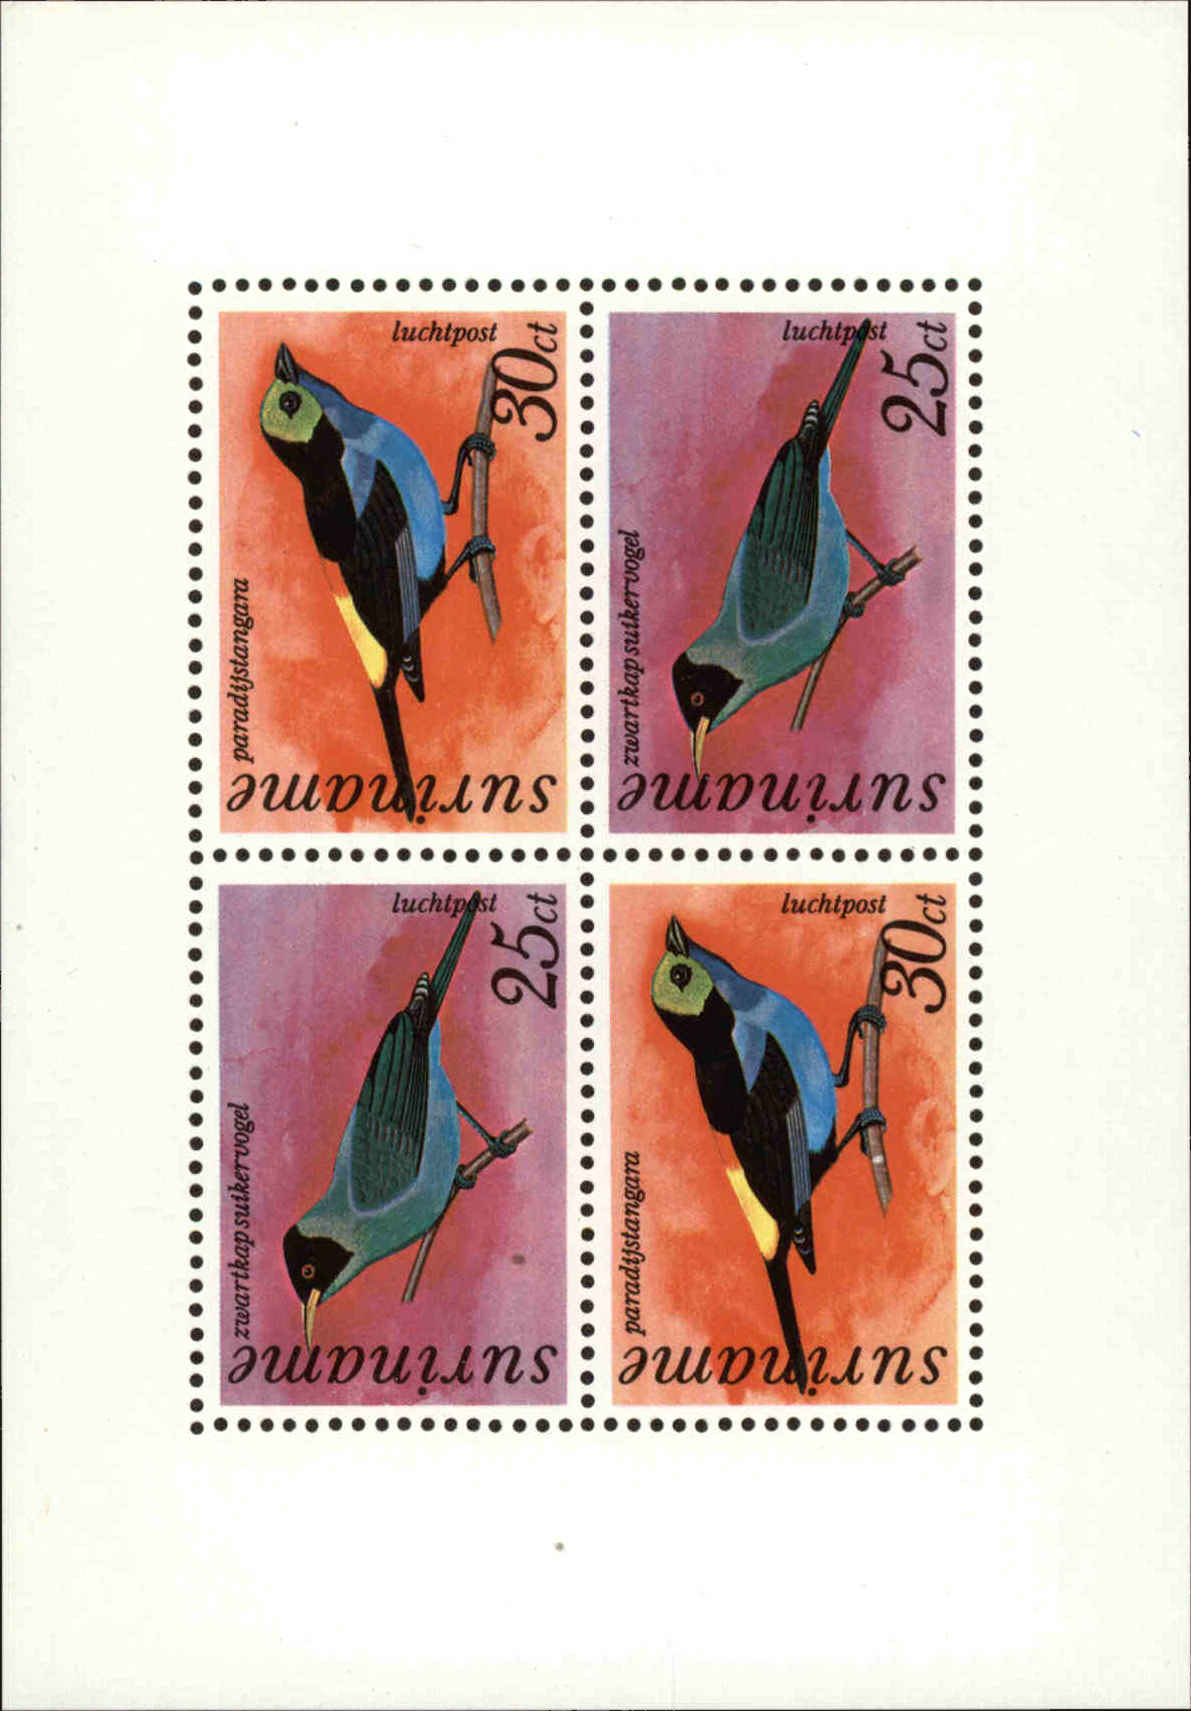 Front view of Surinam C60a collectors stamp